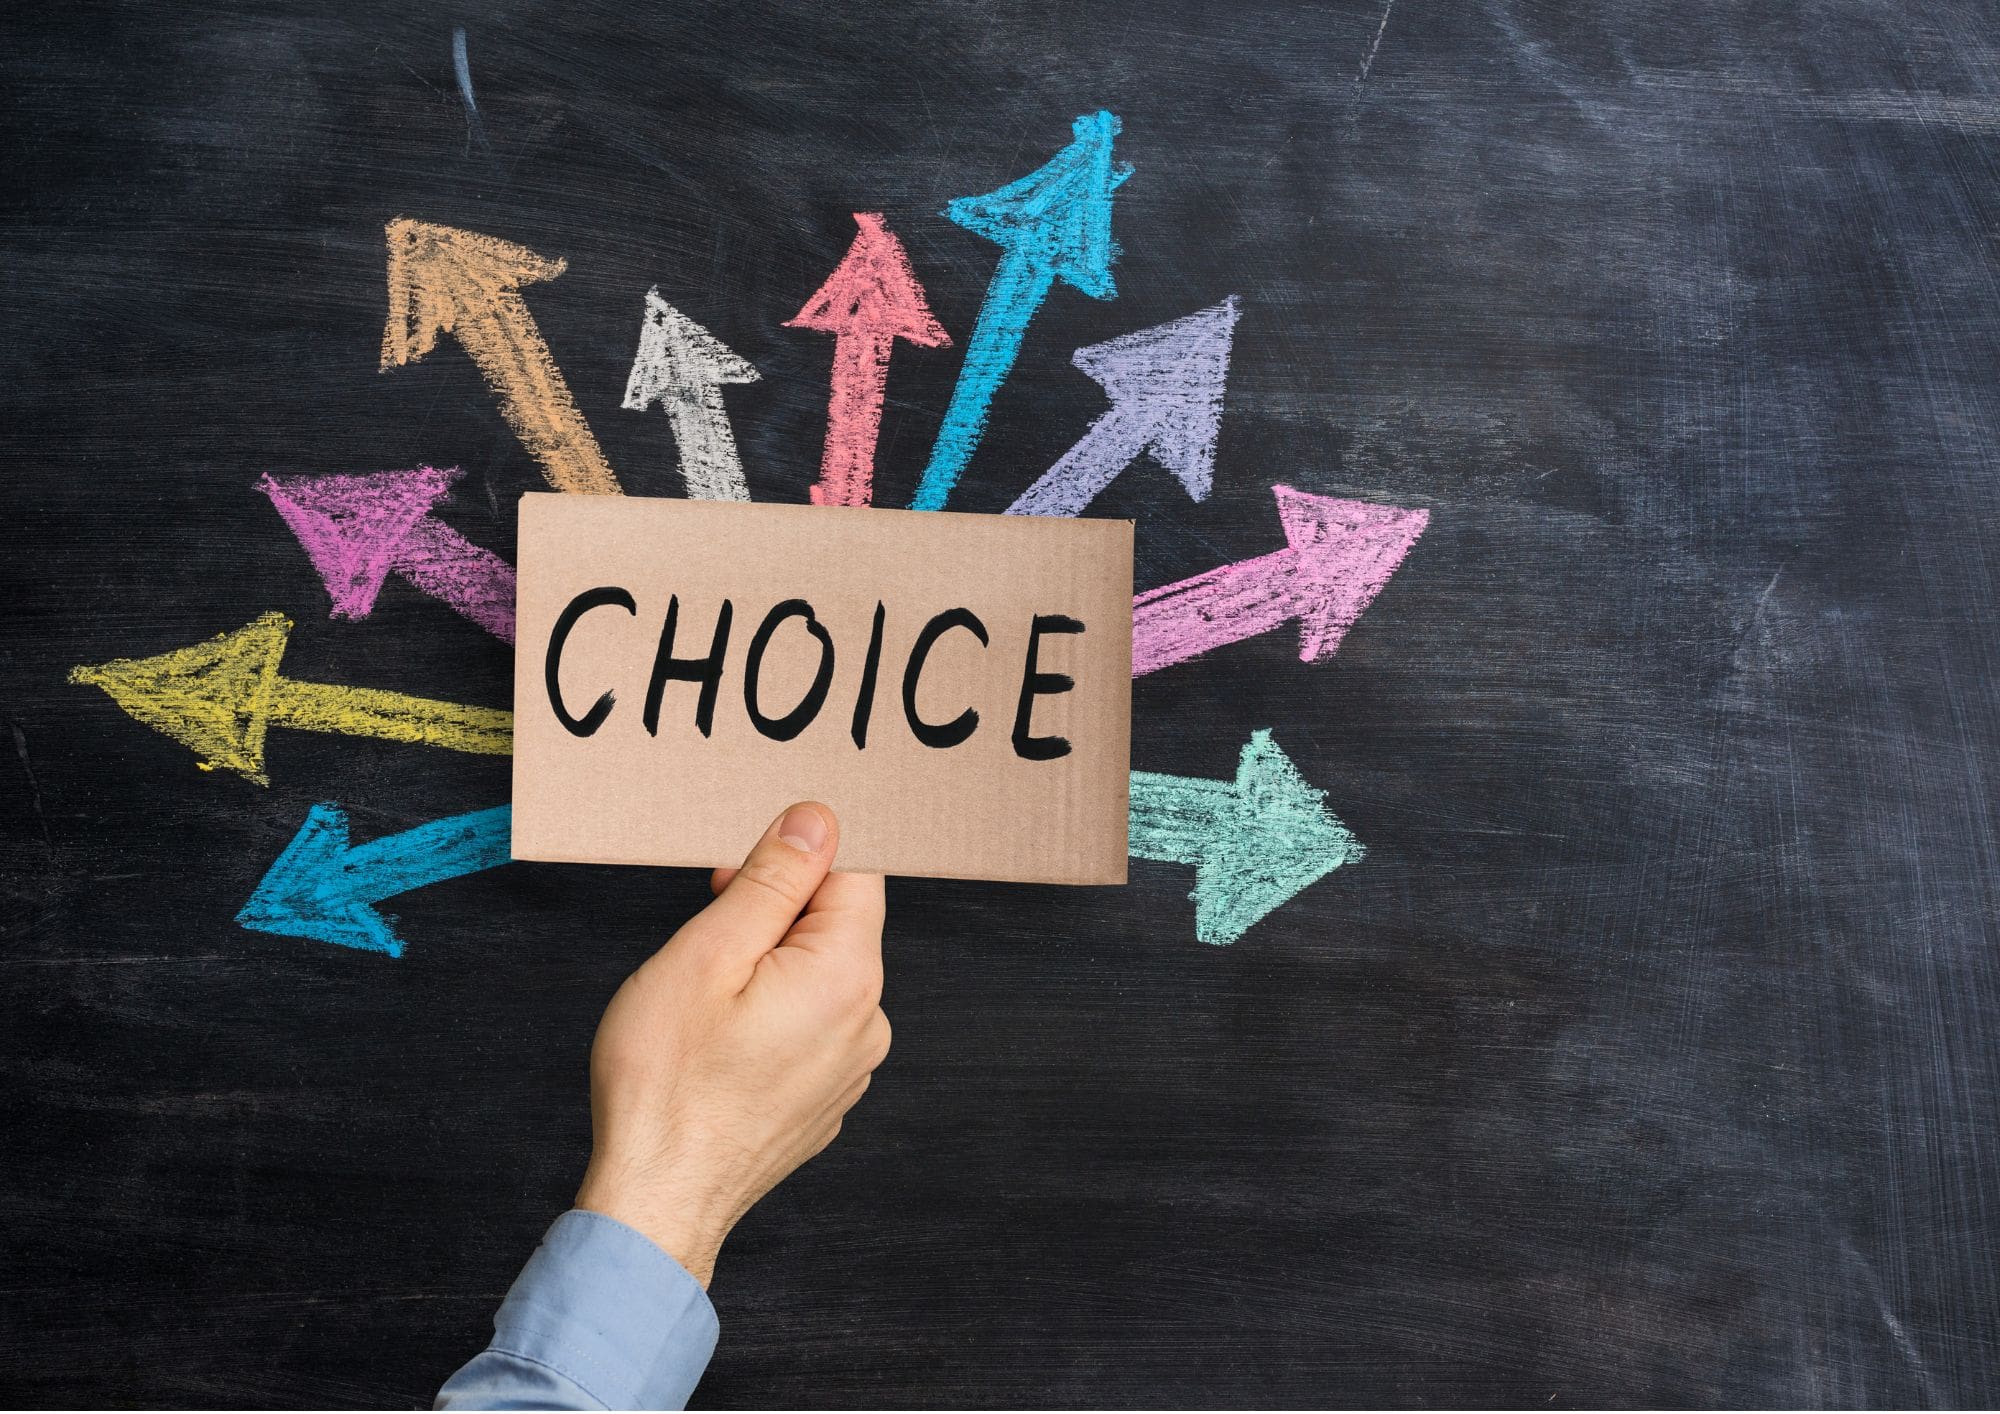 A hand holding up a sign that says "choice": with different arrows pointing in different directions.